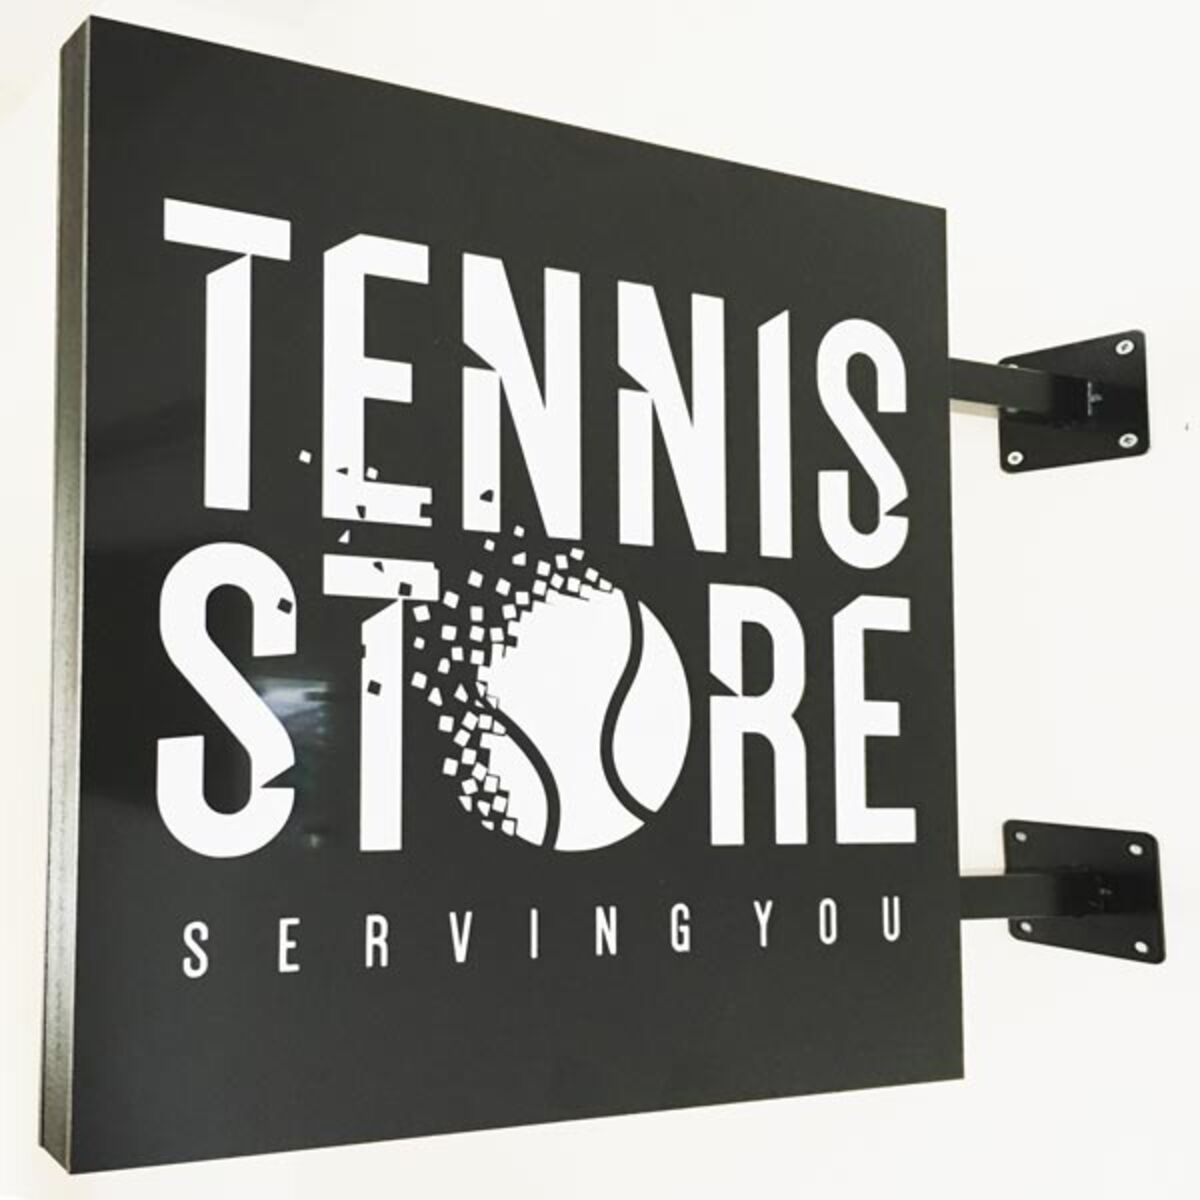 Protruding-Sign-Store-100x100.jpg